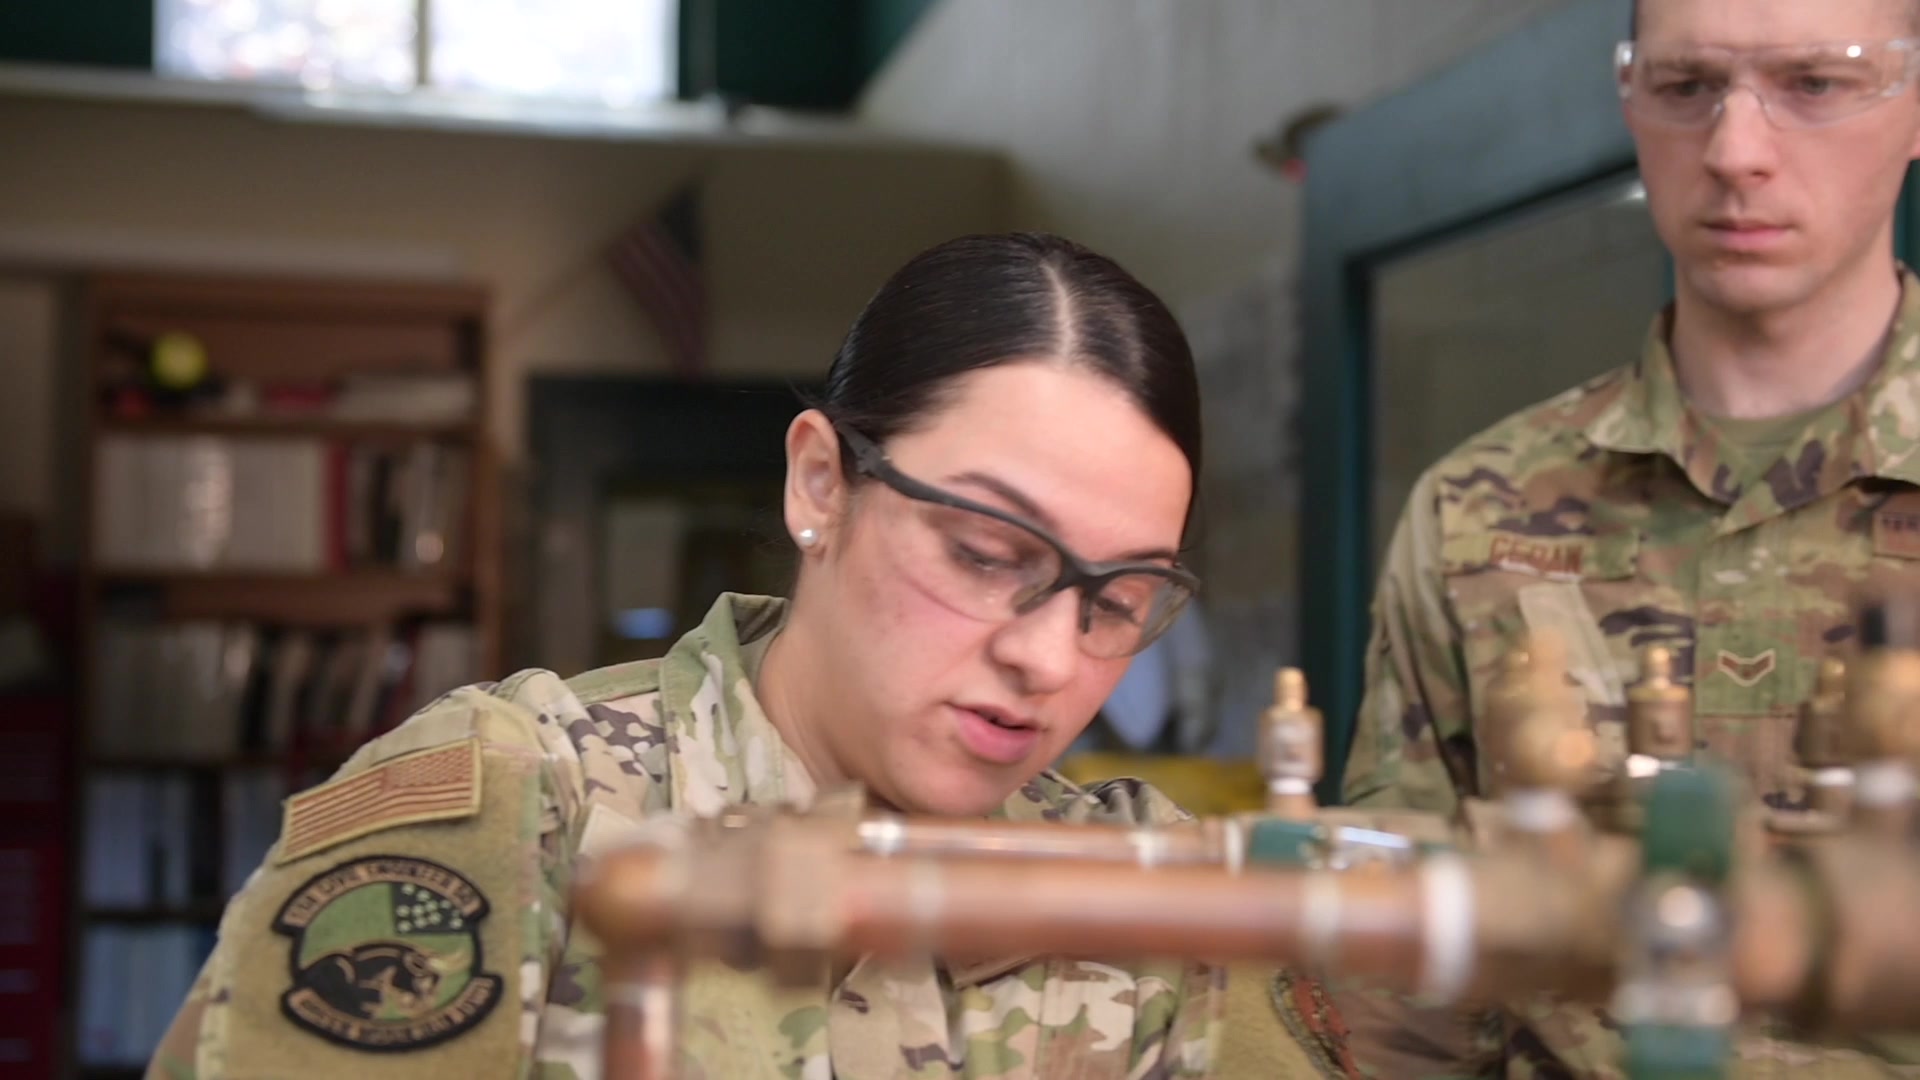 Water and Fuel Systems Maintenance is just one of many civil engineering opportunities available in the Vermont Air National Guard. AMN Tinoco highlights this AFSC and gives us an inside look into what Airmen do in this technical career field.